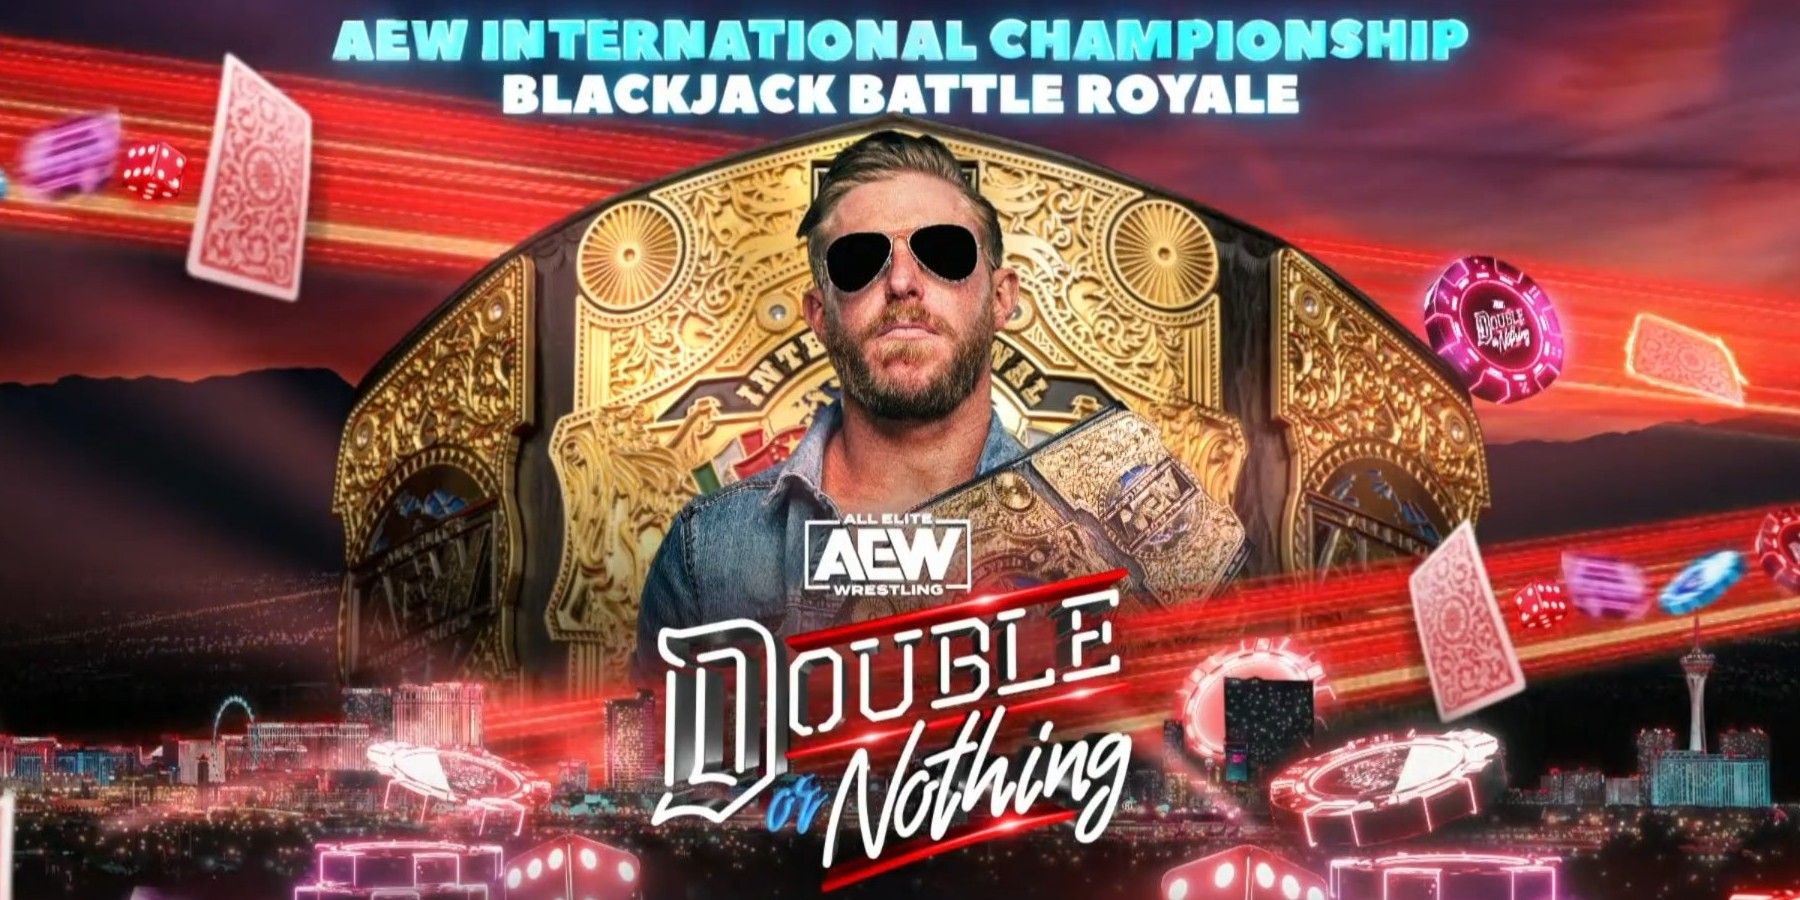 Orange Cassidy AEW International Championship Blackjack Battle Royale graphic at AEW Double or Nothing 2023